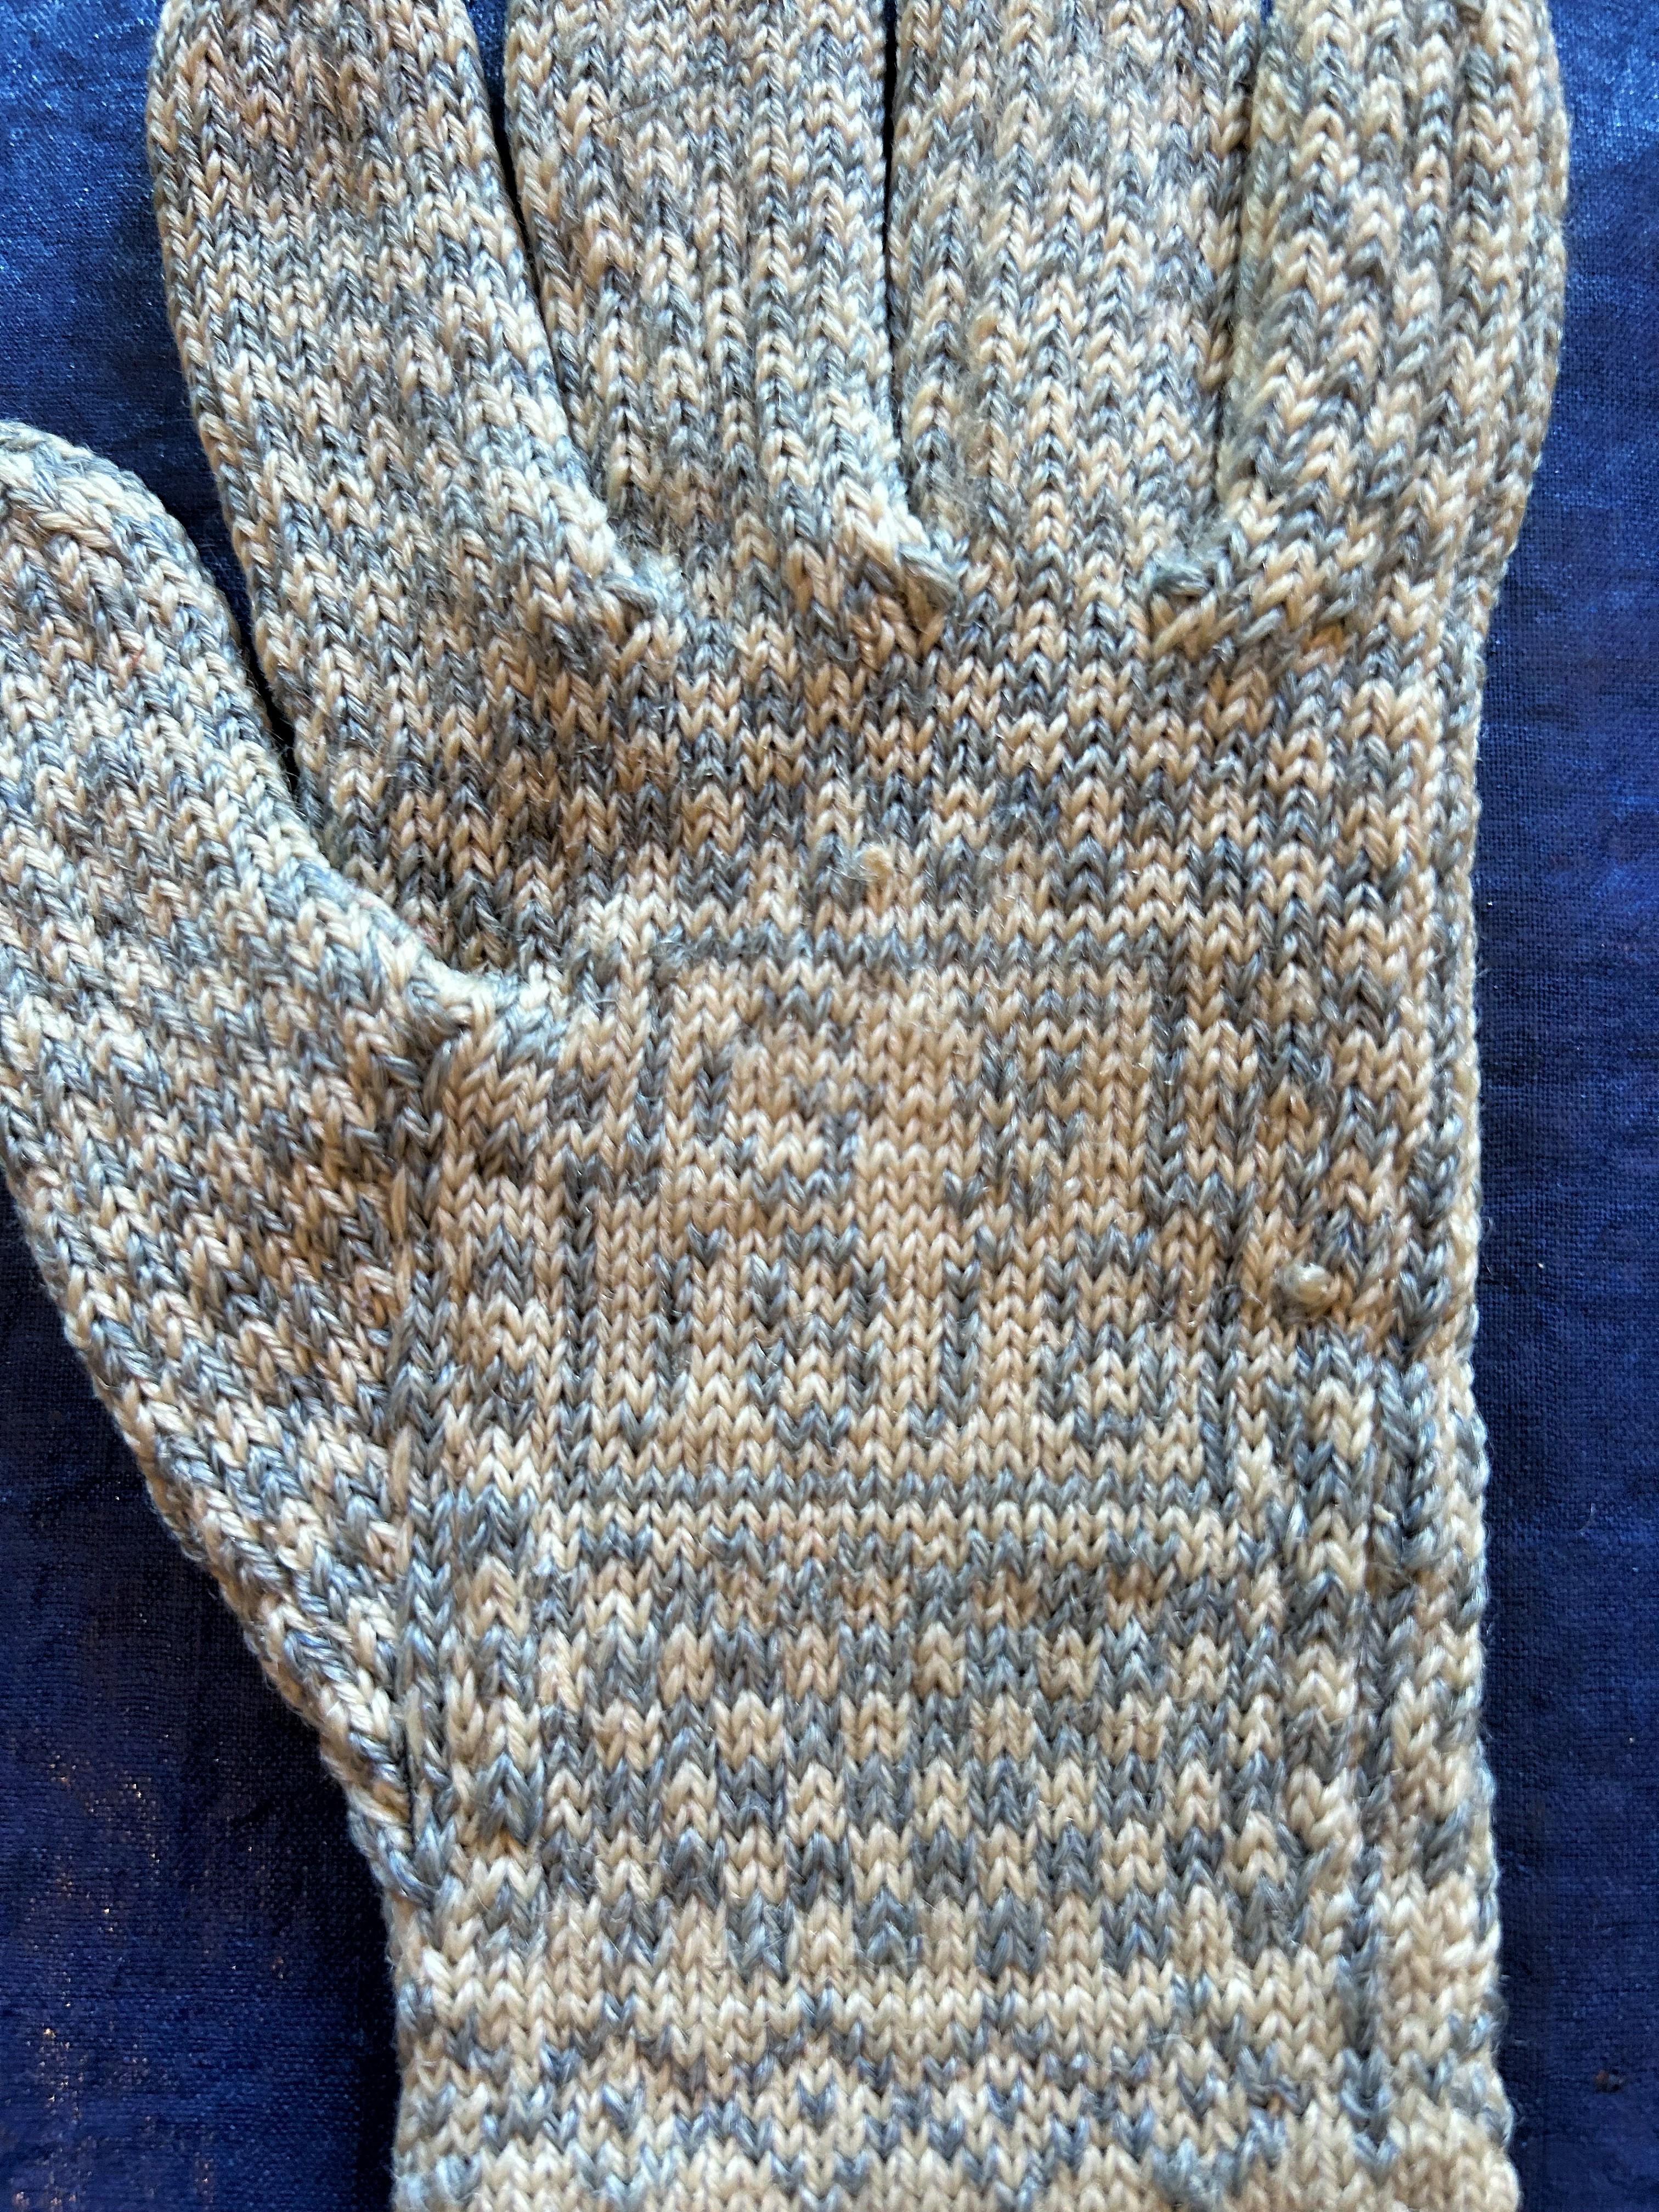 A pair of Sanquhar wool knitted gloves near Dumfries dated 1818 - Scotland 1